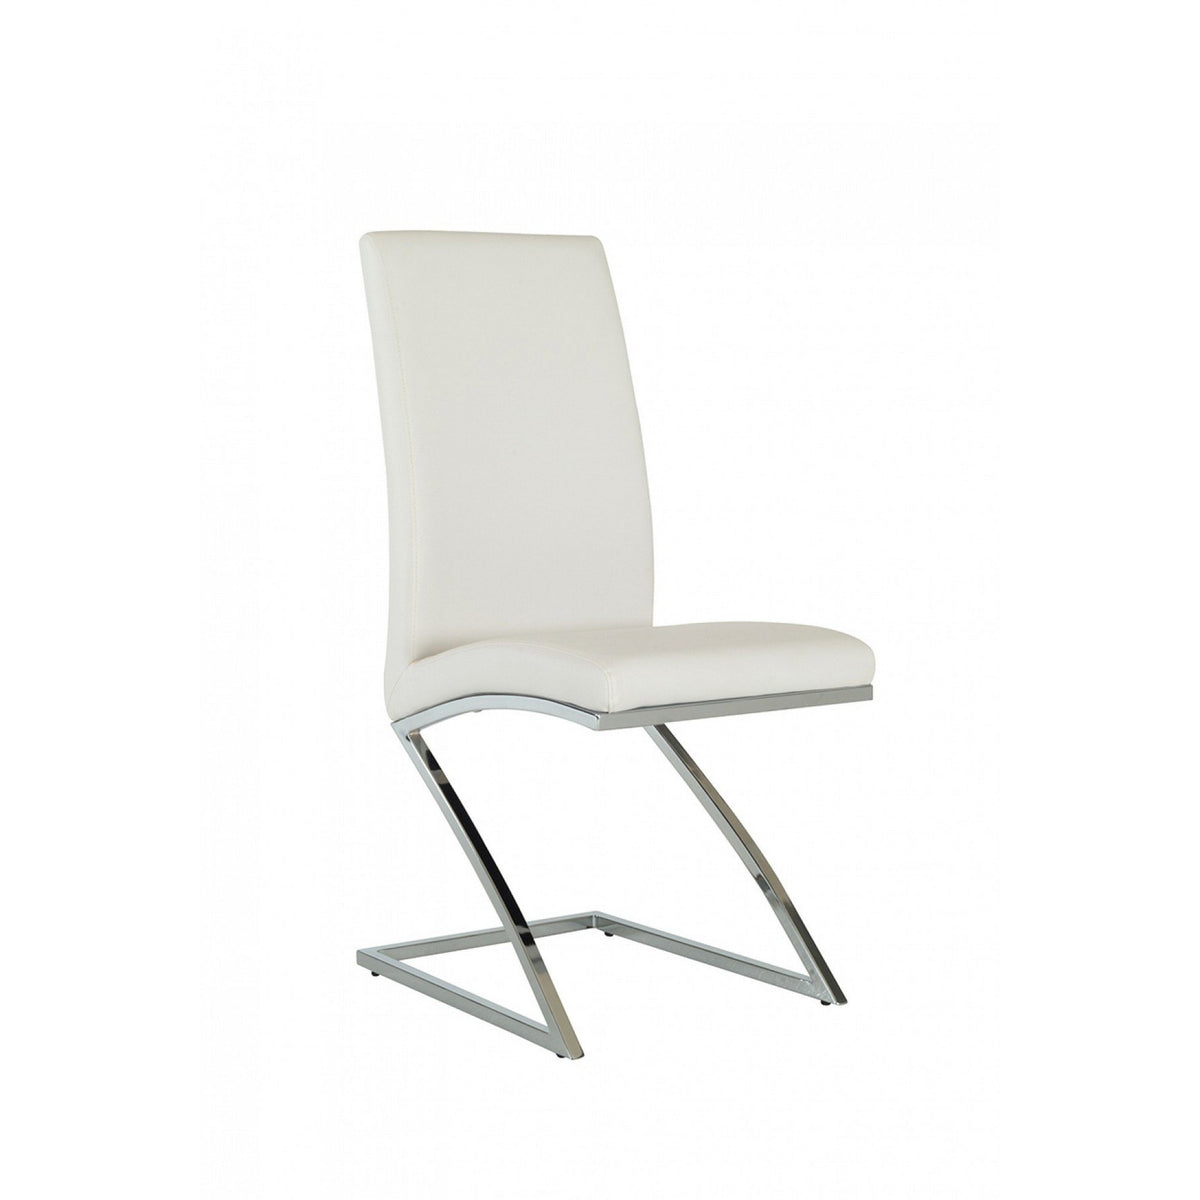 Leatherette Dining Chair with Z Shape Metal Base, Set of 2, White and Chrome - BM223505